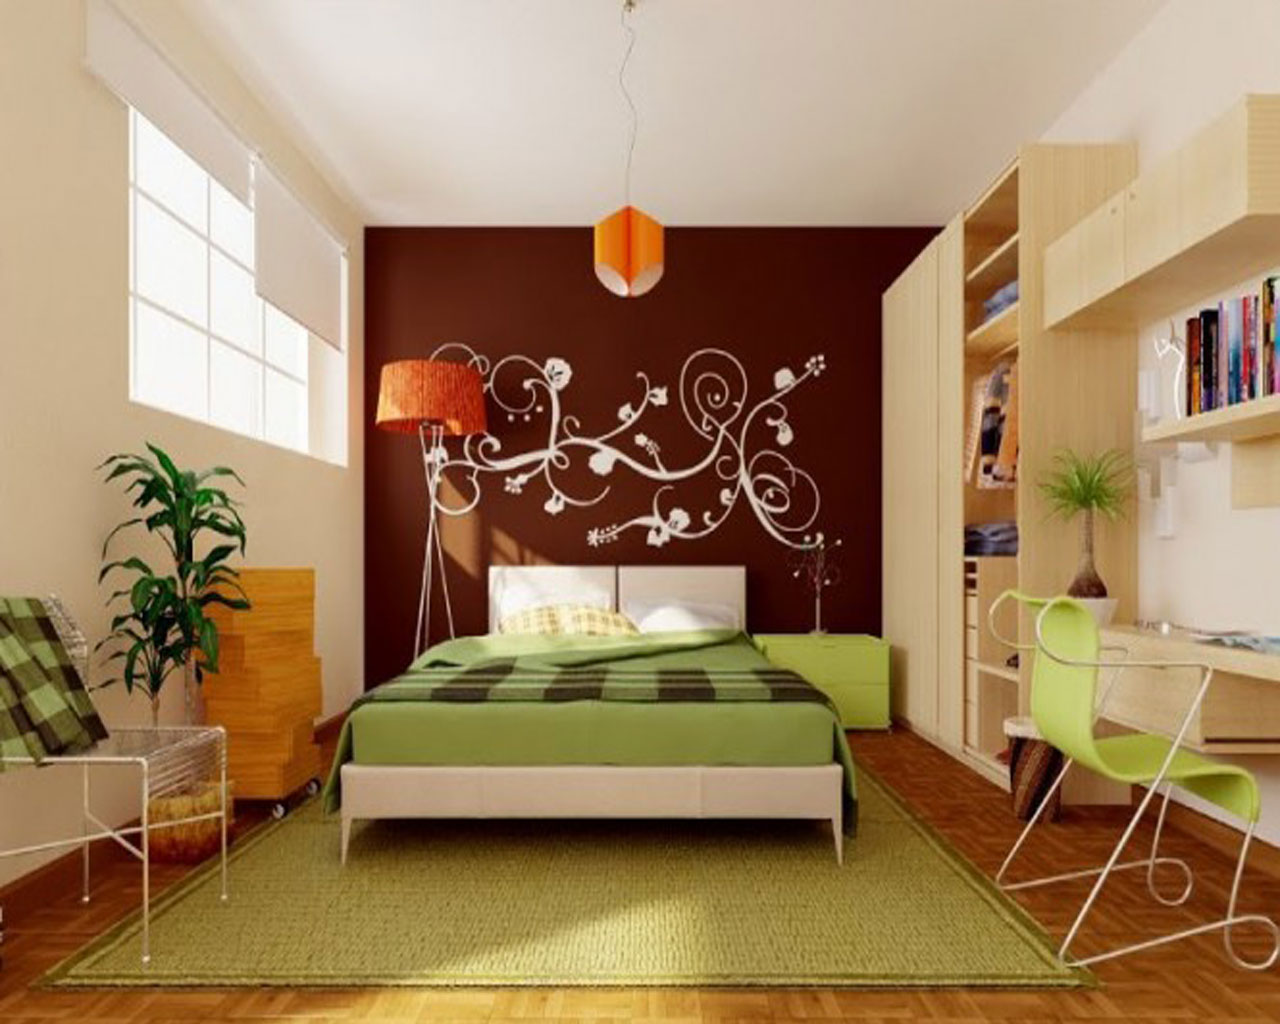 Desk Chair Pattern Unique Desk Chair Or Bamboo Pattern Pendant Lamp Feat Green Area Rug And Awesome Wall Decal In Tiny Bedroom Idea Bedroom Beautiful Tiny Bedroom Ideas For Maximizing Style